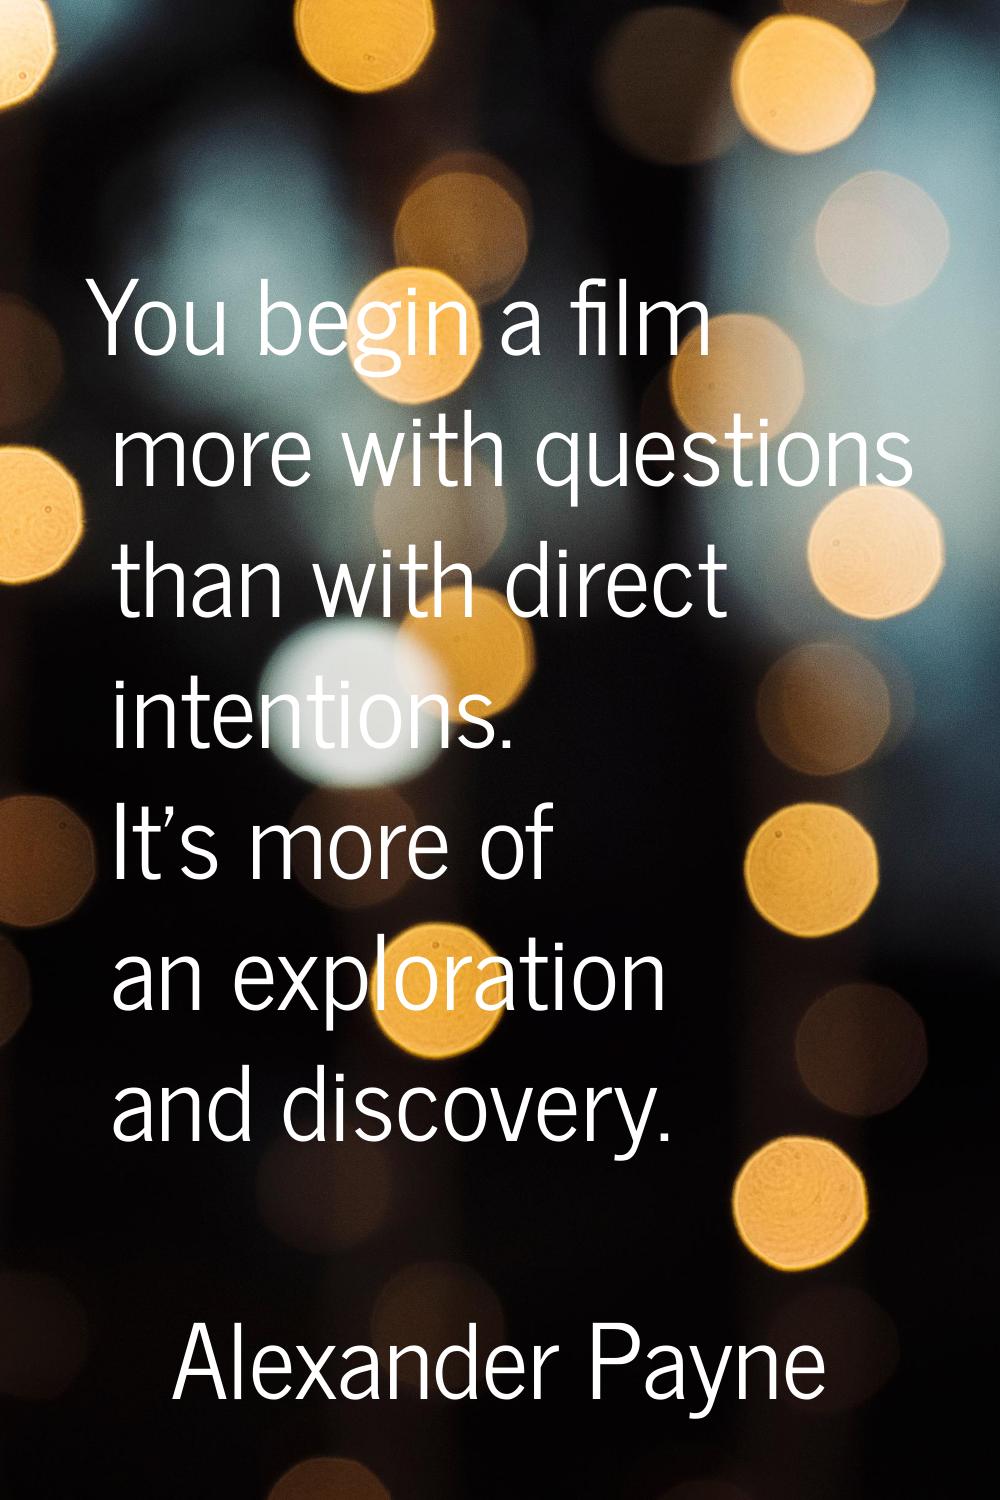 You begin a film more with questions than with direct intentions. It's more of an exploration and d